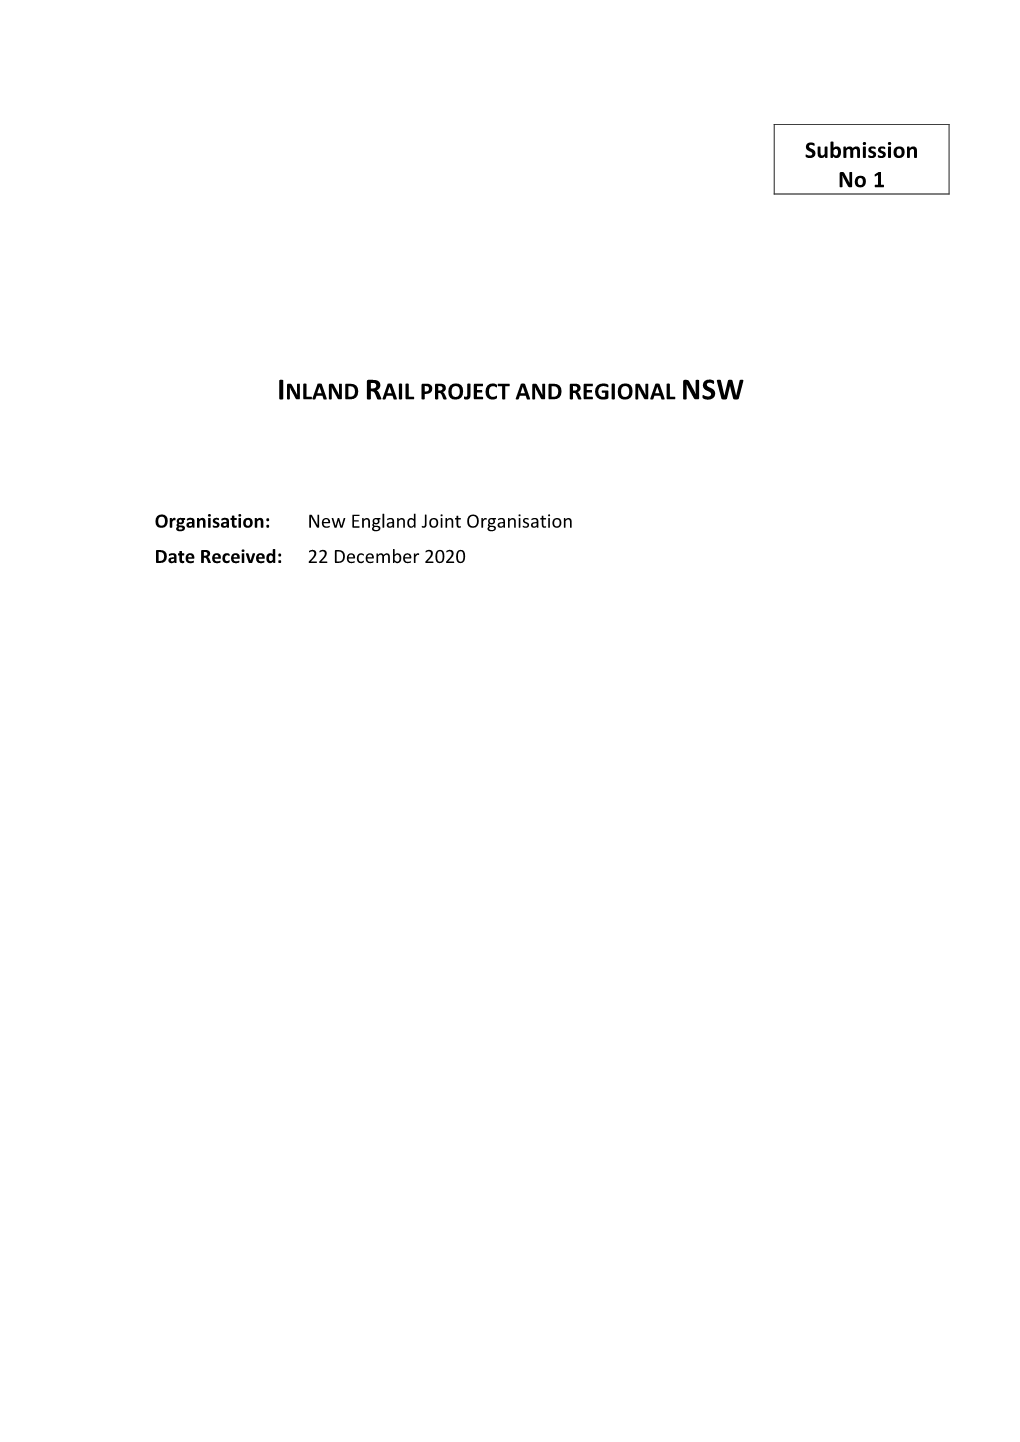 Submission No 1 INLAND RAIL PROJECT and REGIONAL